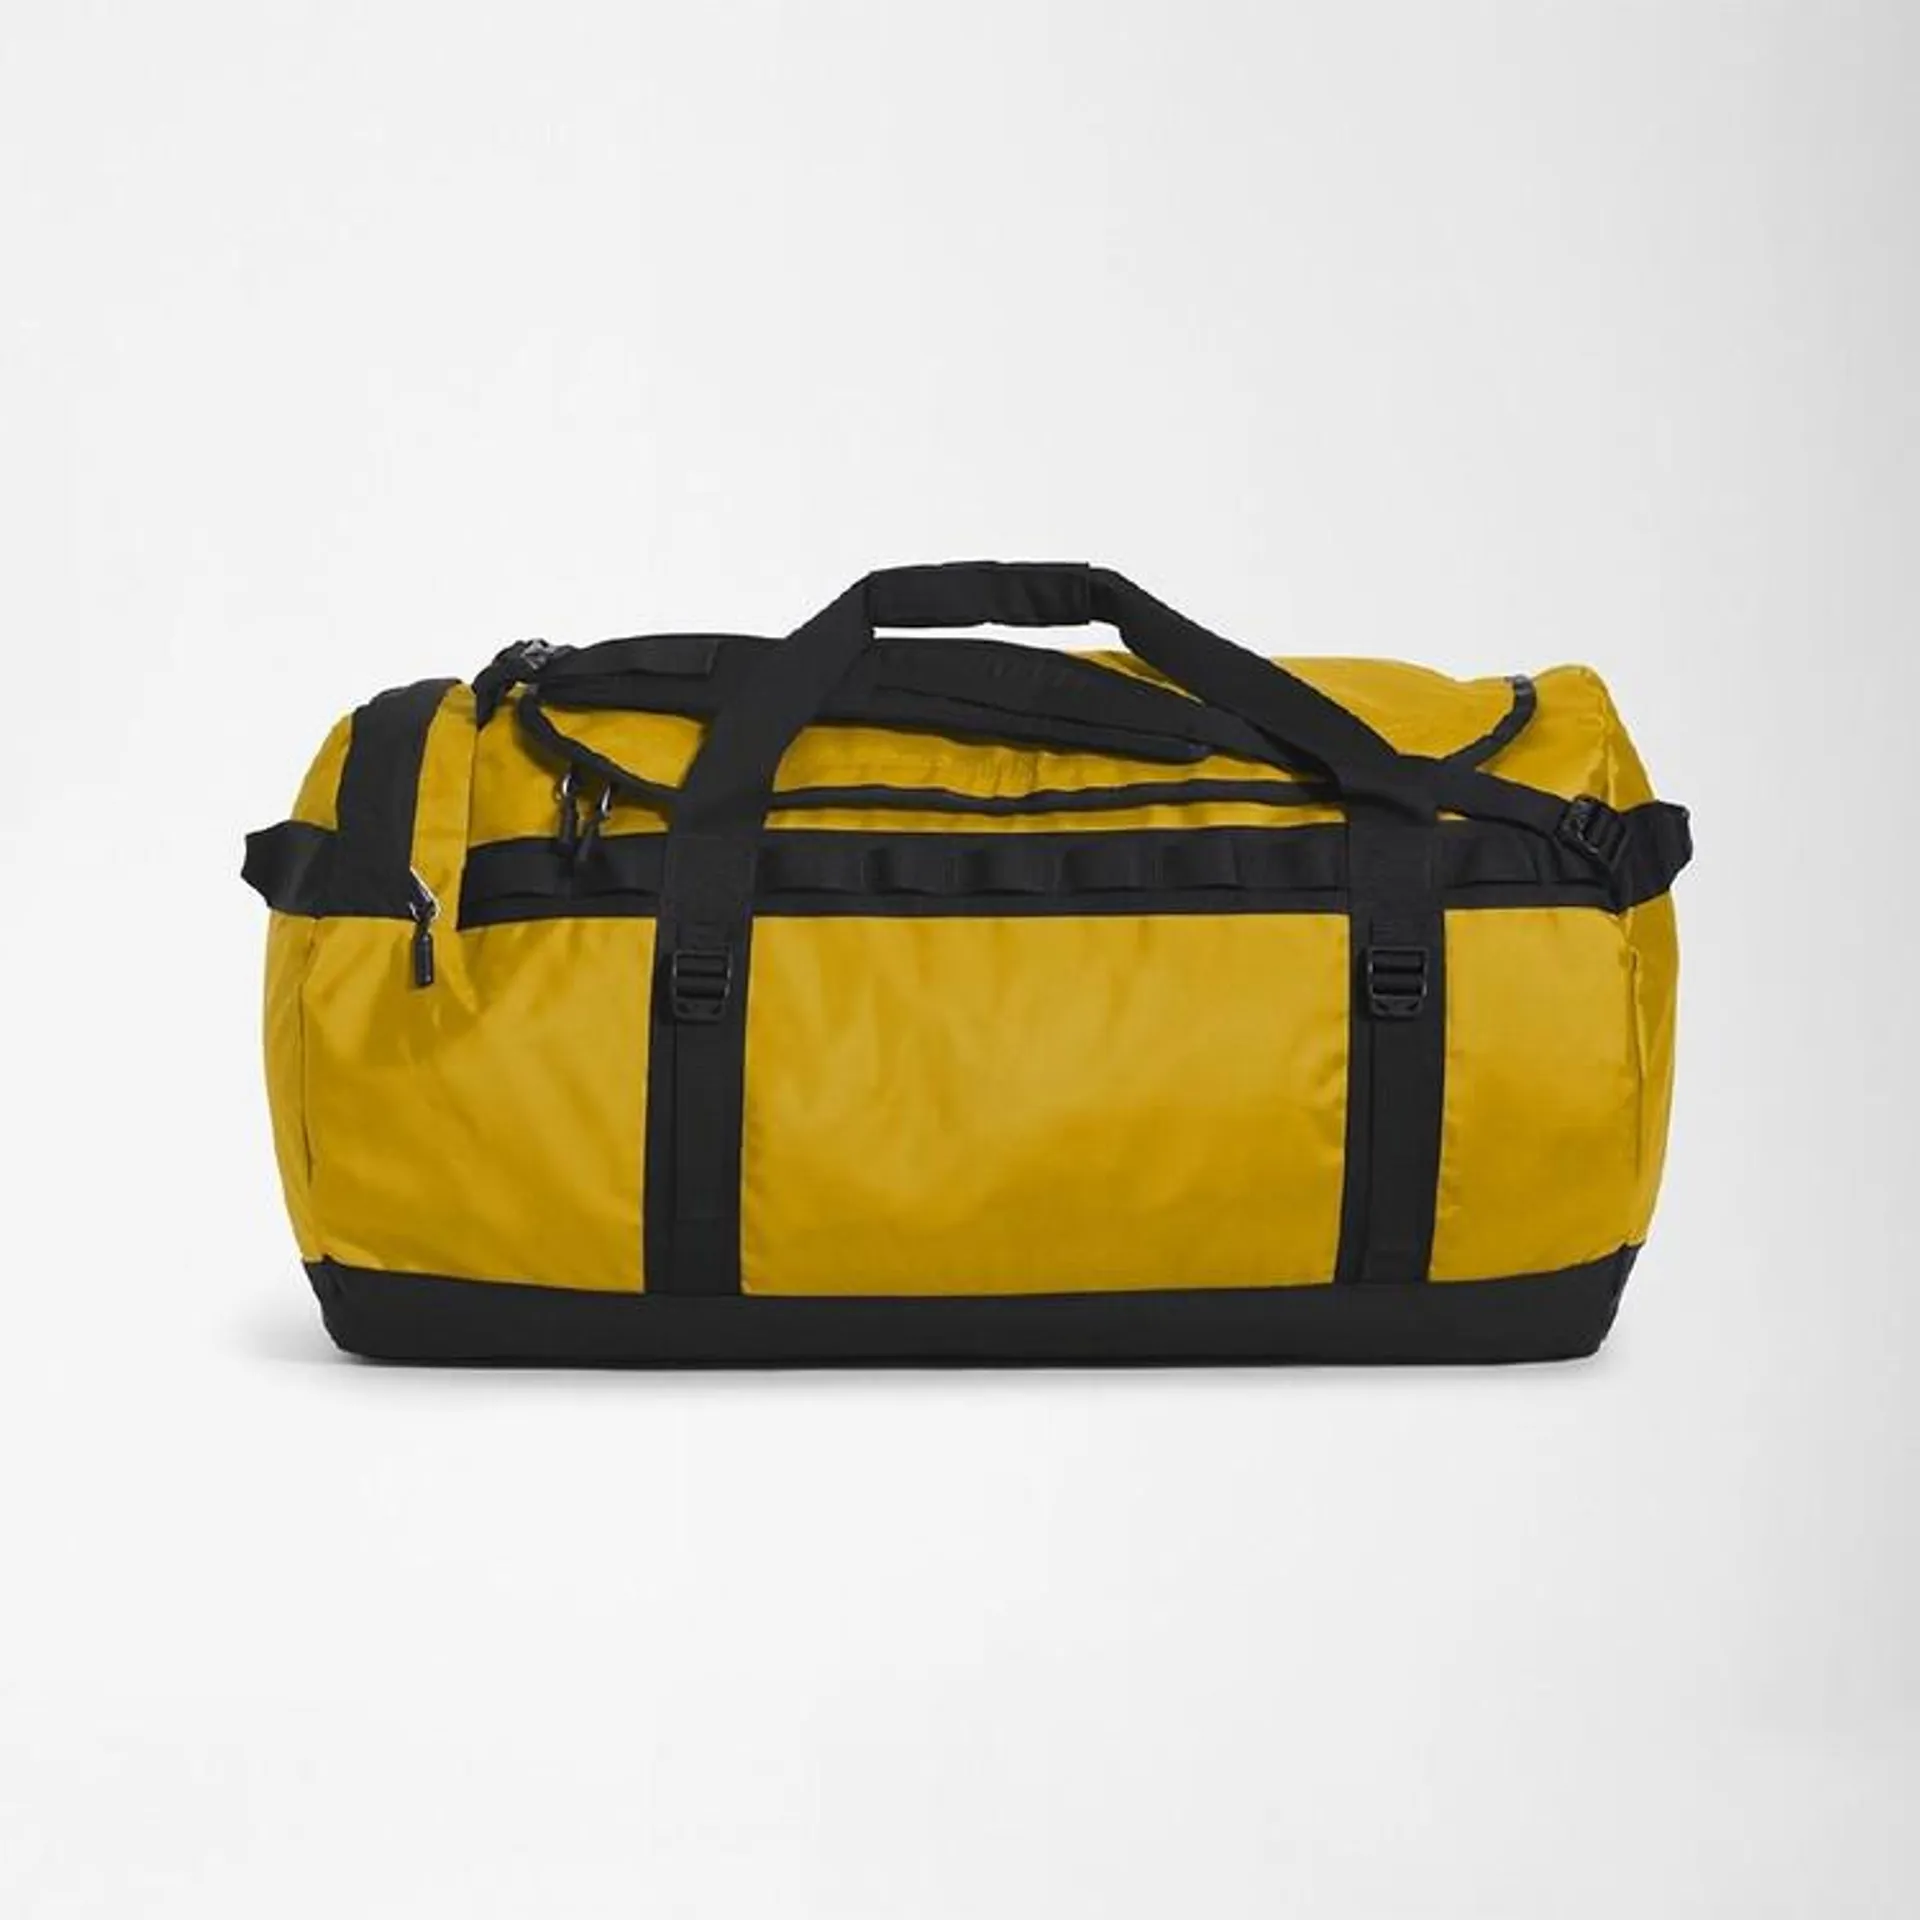 The North Face Large Base Camp Duffel Gold & Black 95 L